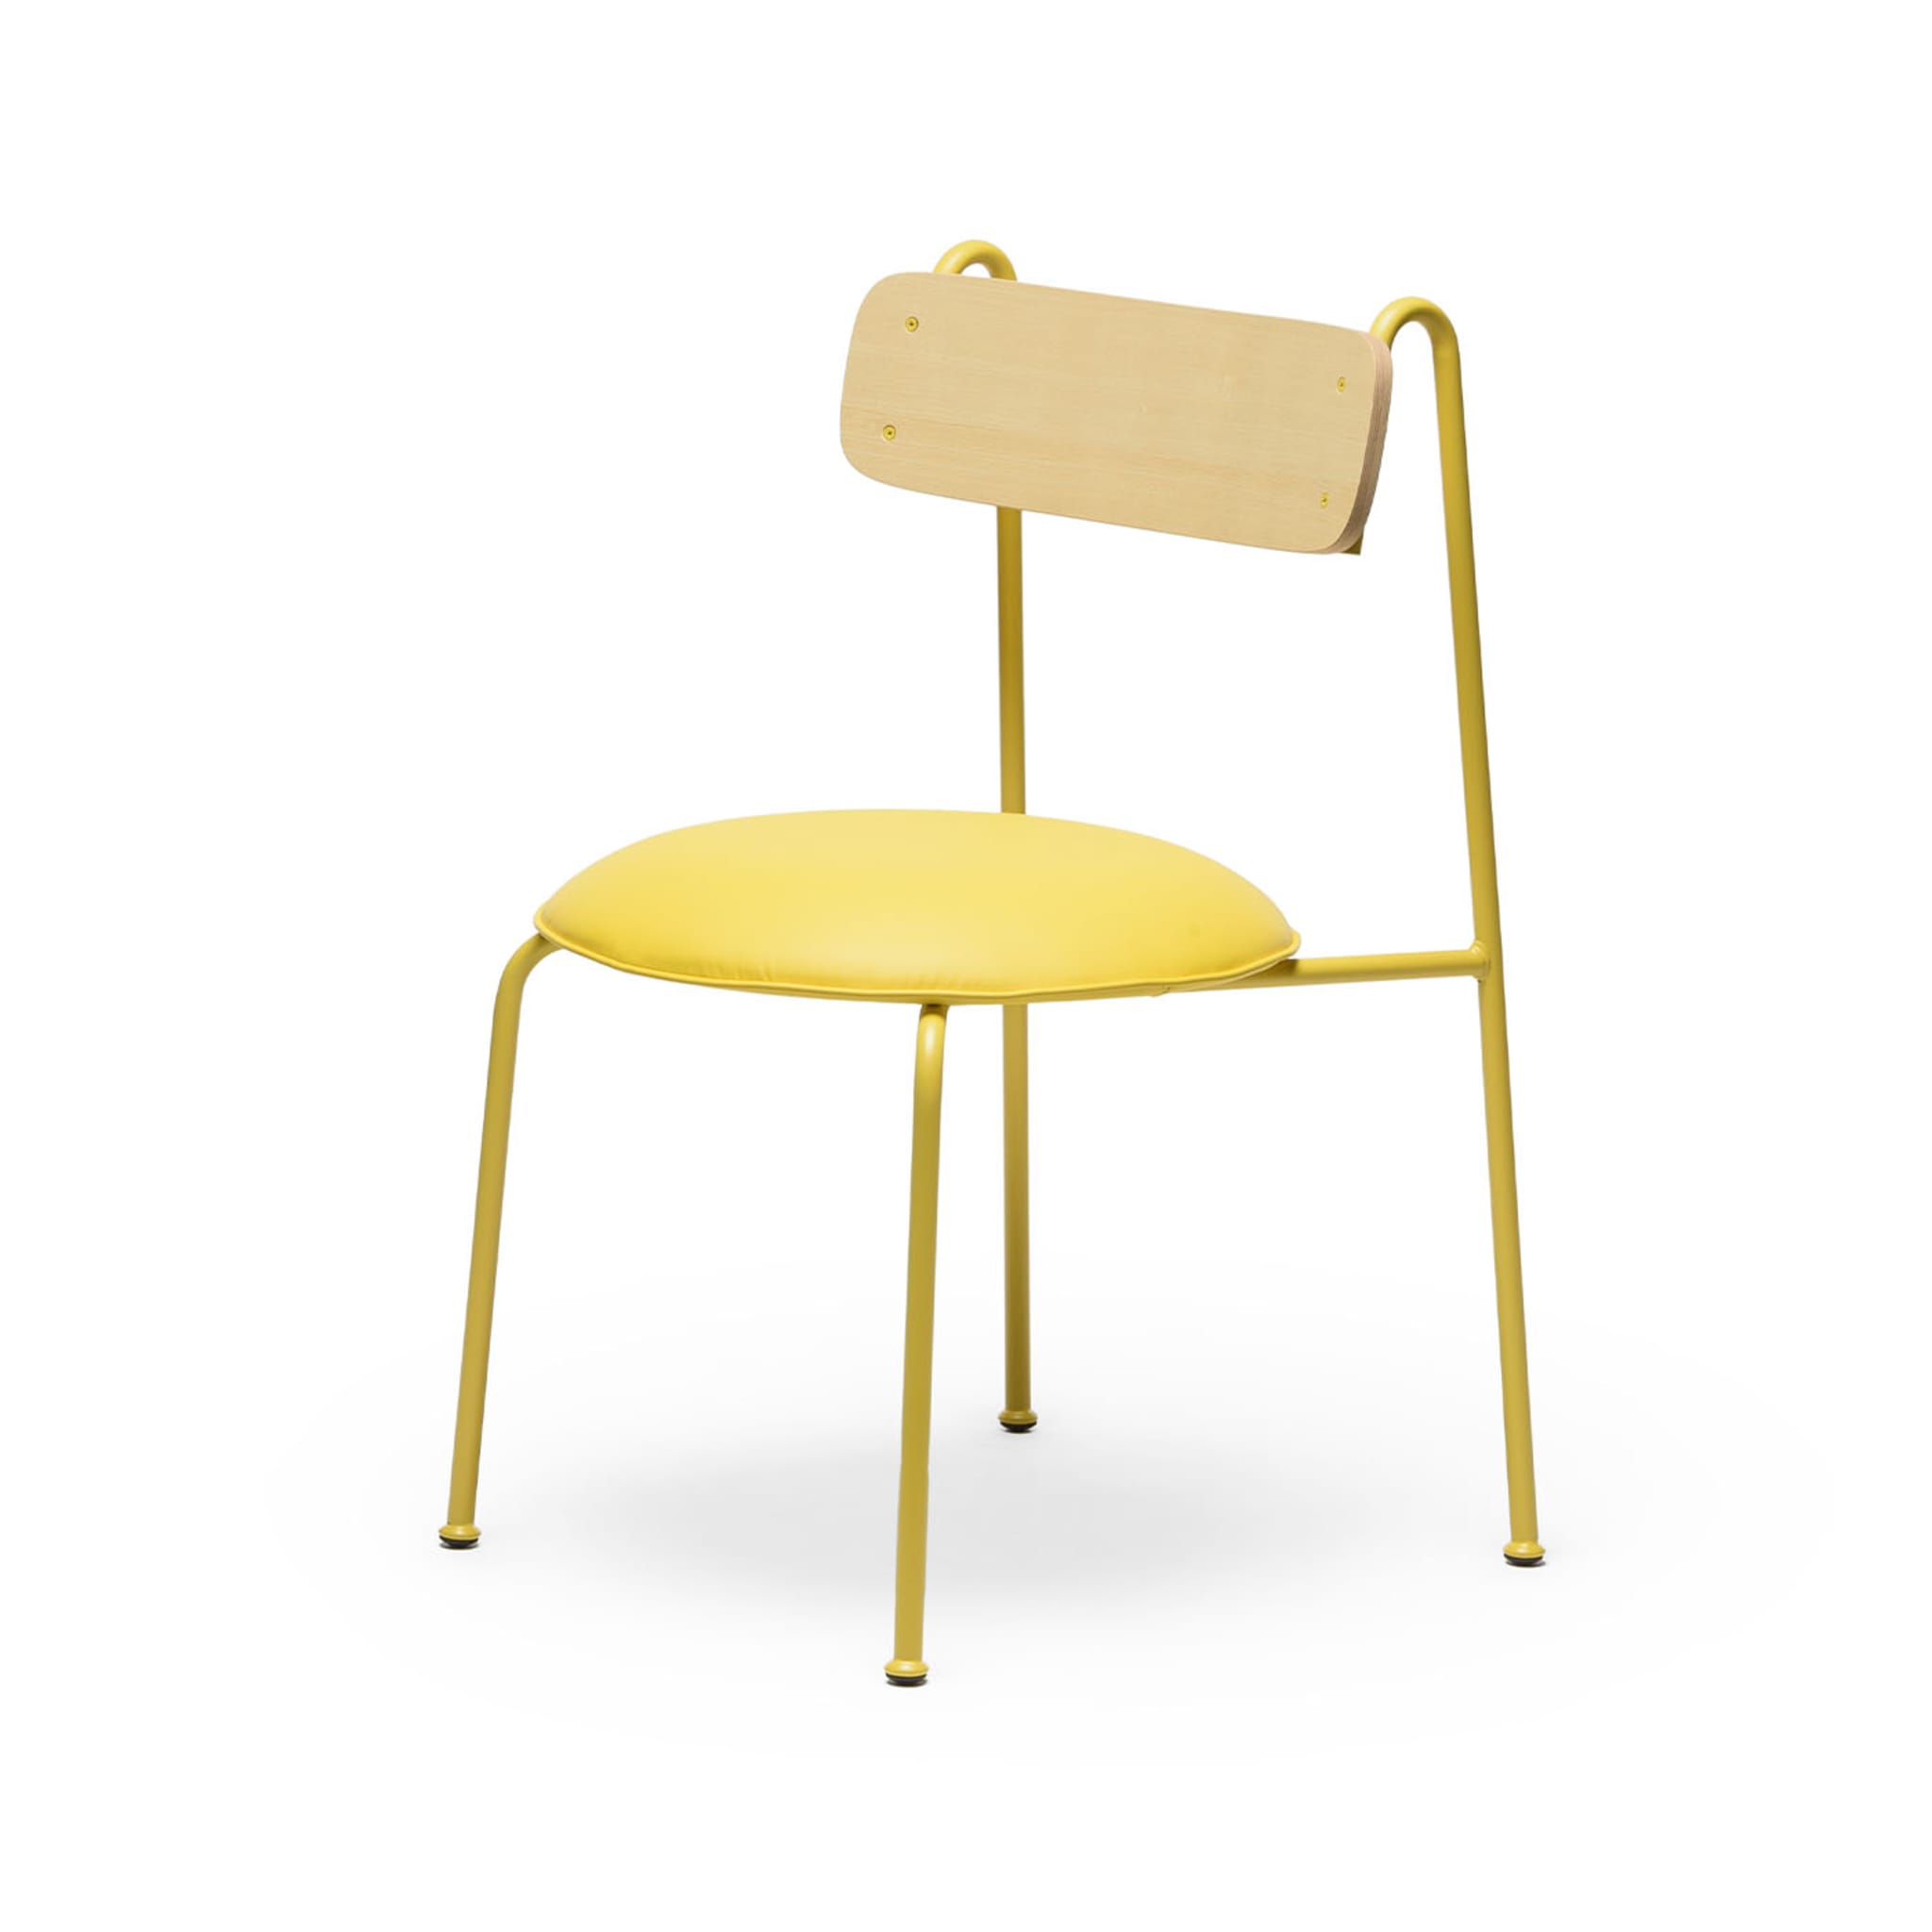 Lena S Yellow And Natural Ash Chair By Designerd - Alternative view 3